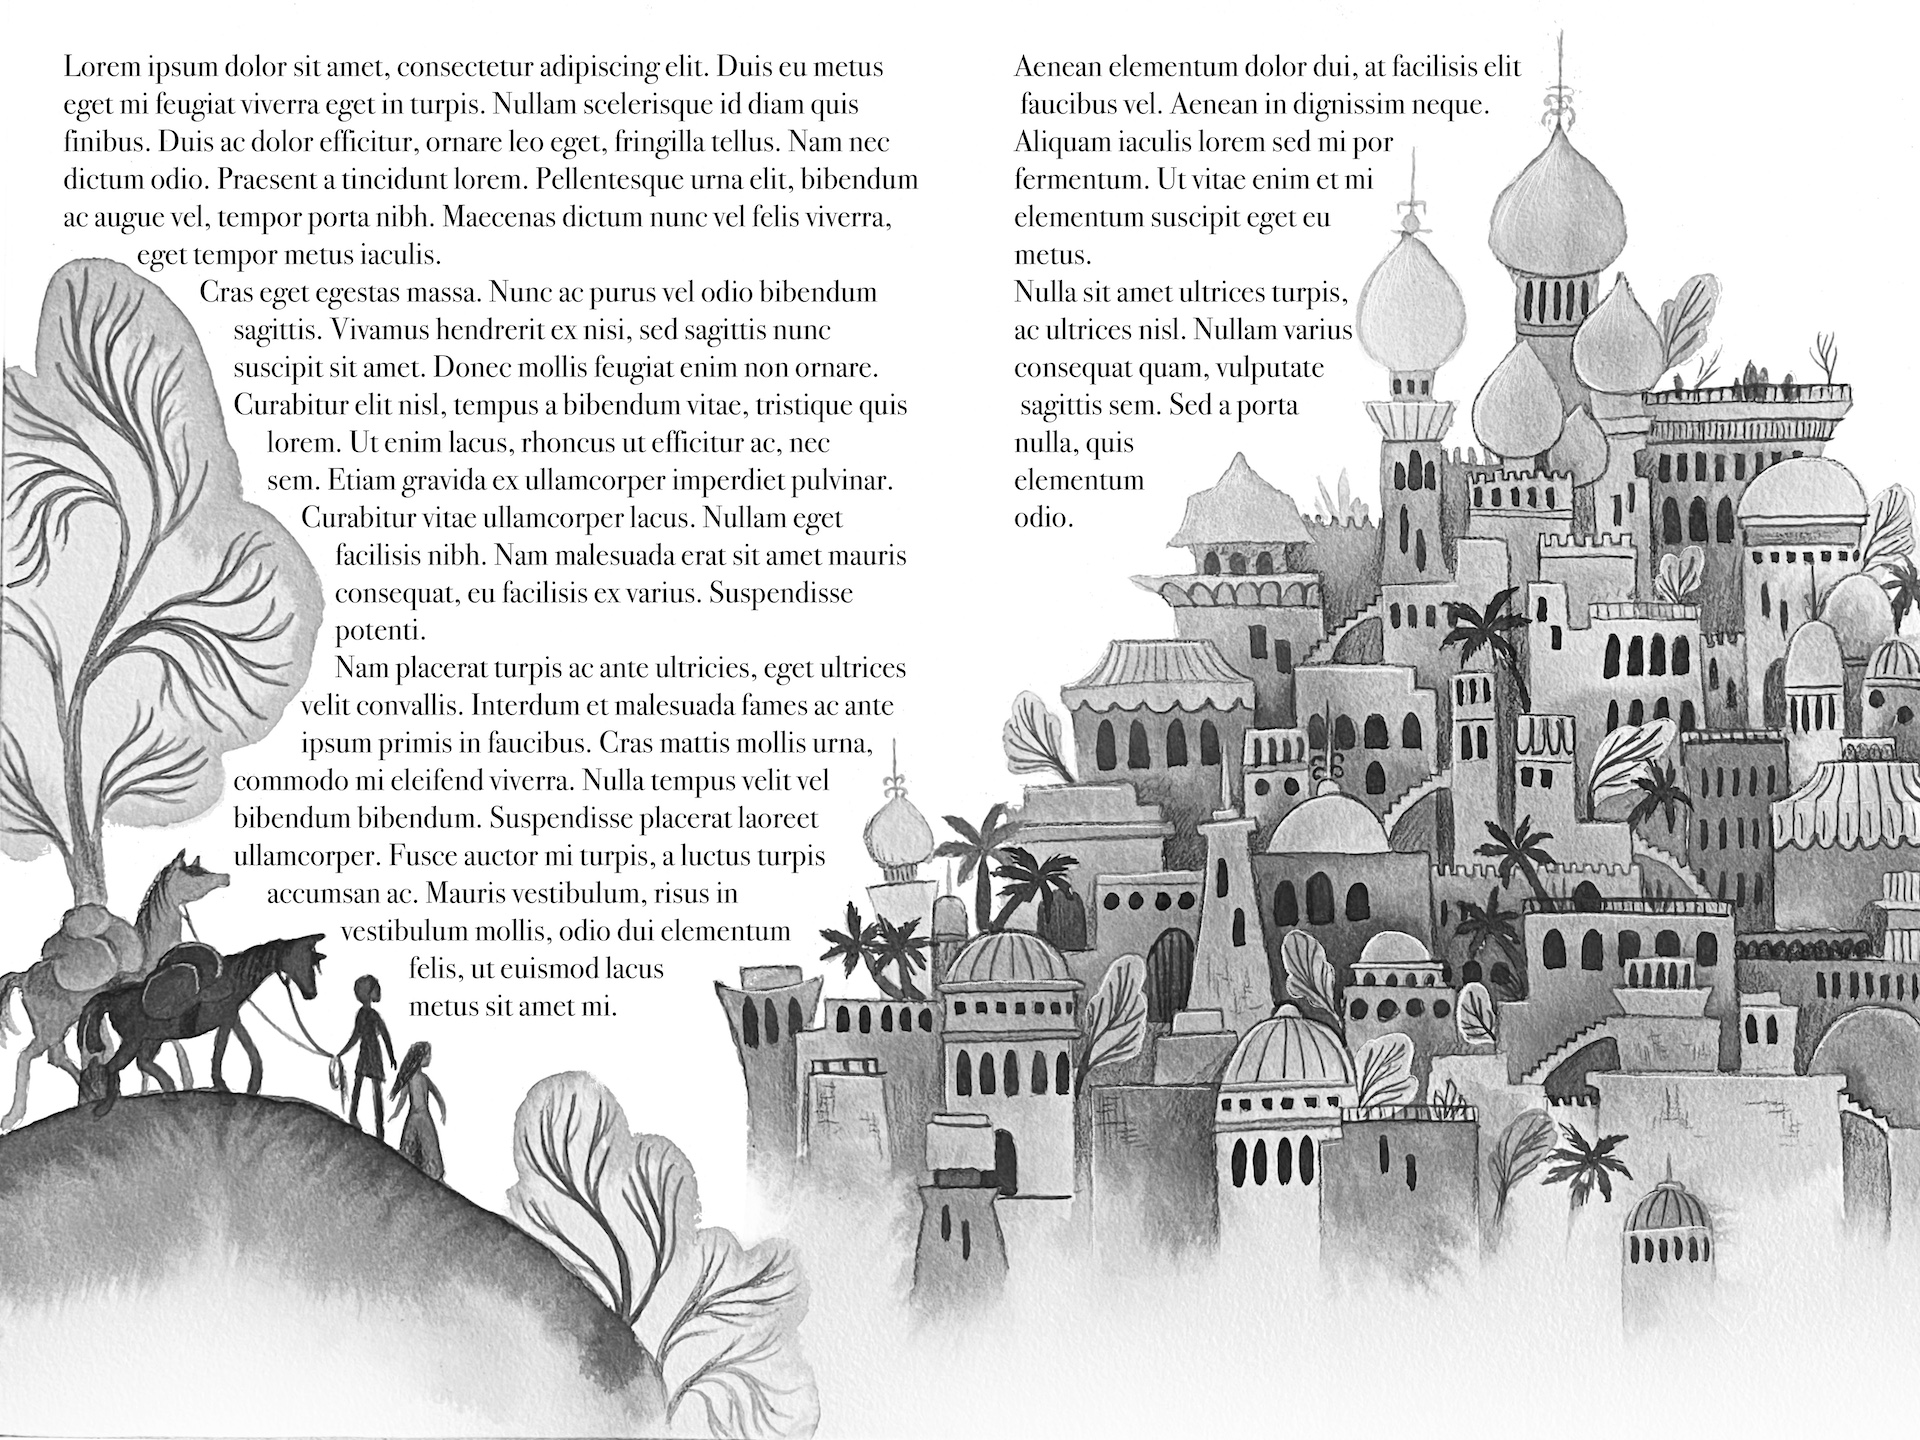 Black and white interior illustration for The Horse and His Boy from the Chronicle of Narnia series by C. S. Lewis. The image shows a hill in the foreground on the left with the silhouettes of 2 horses with bundles on their backs, being led by 2 children. On the right side of the image is a city on a hill, with a skyline with domed towers like a city in the Middle East. The bottom of the whole image is obscured by white mist.